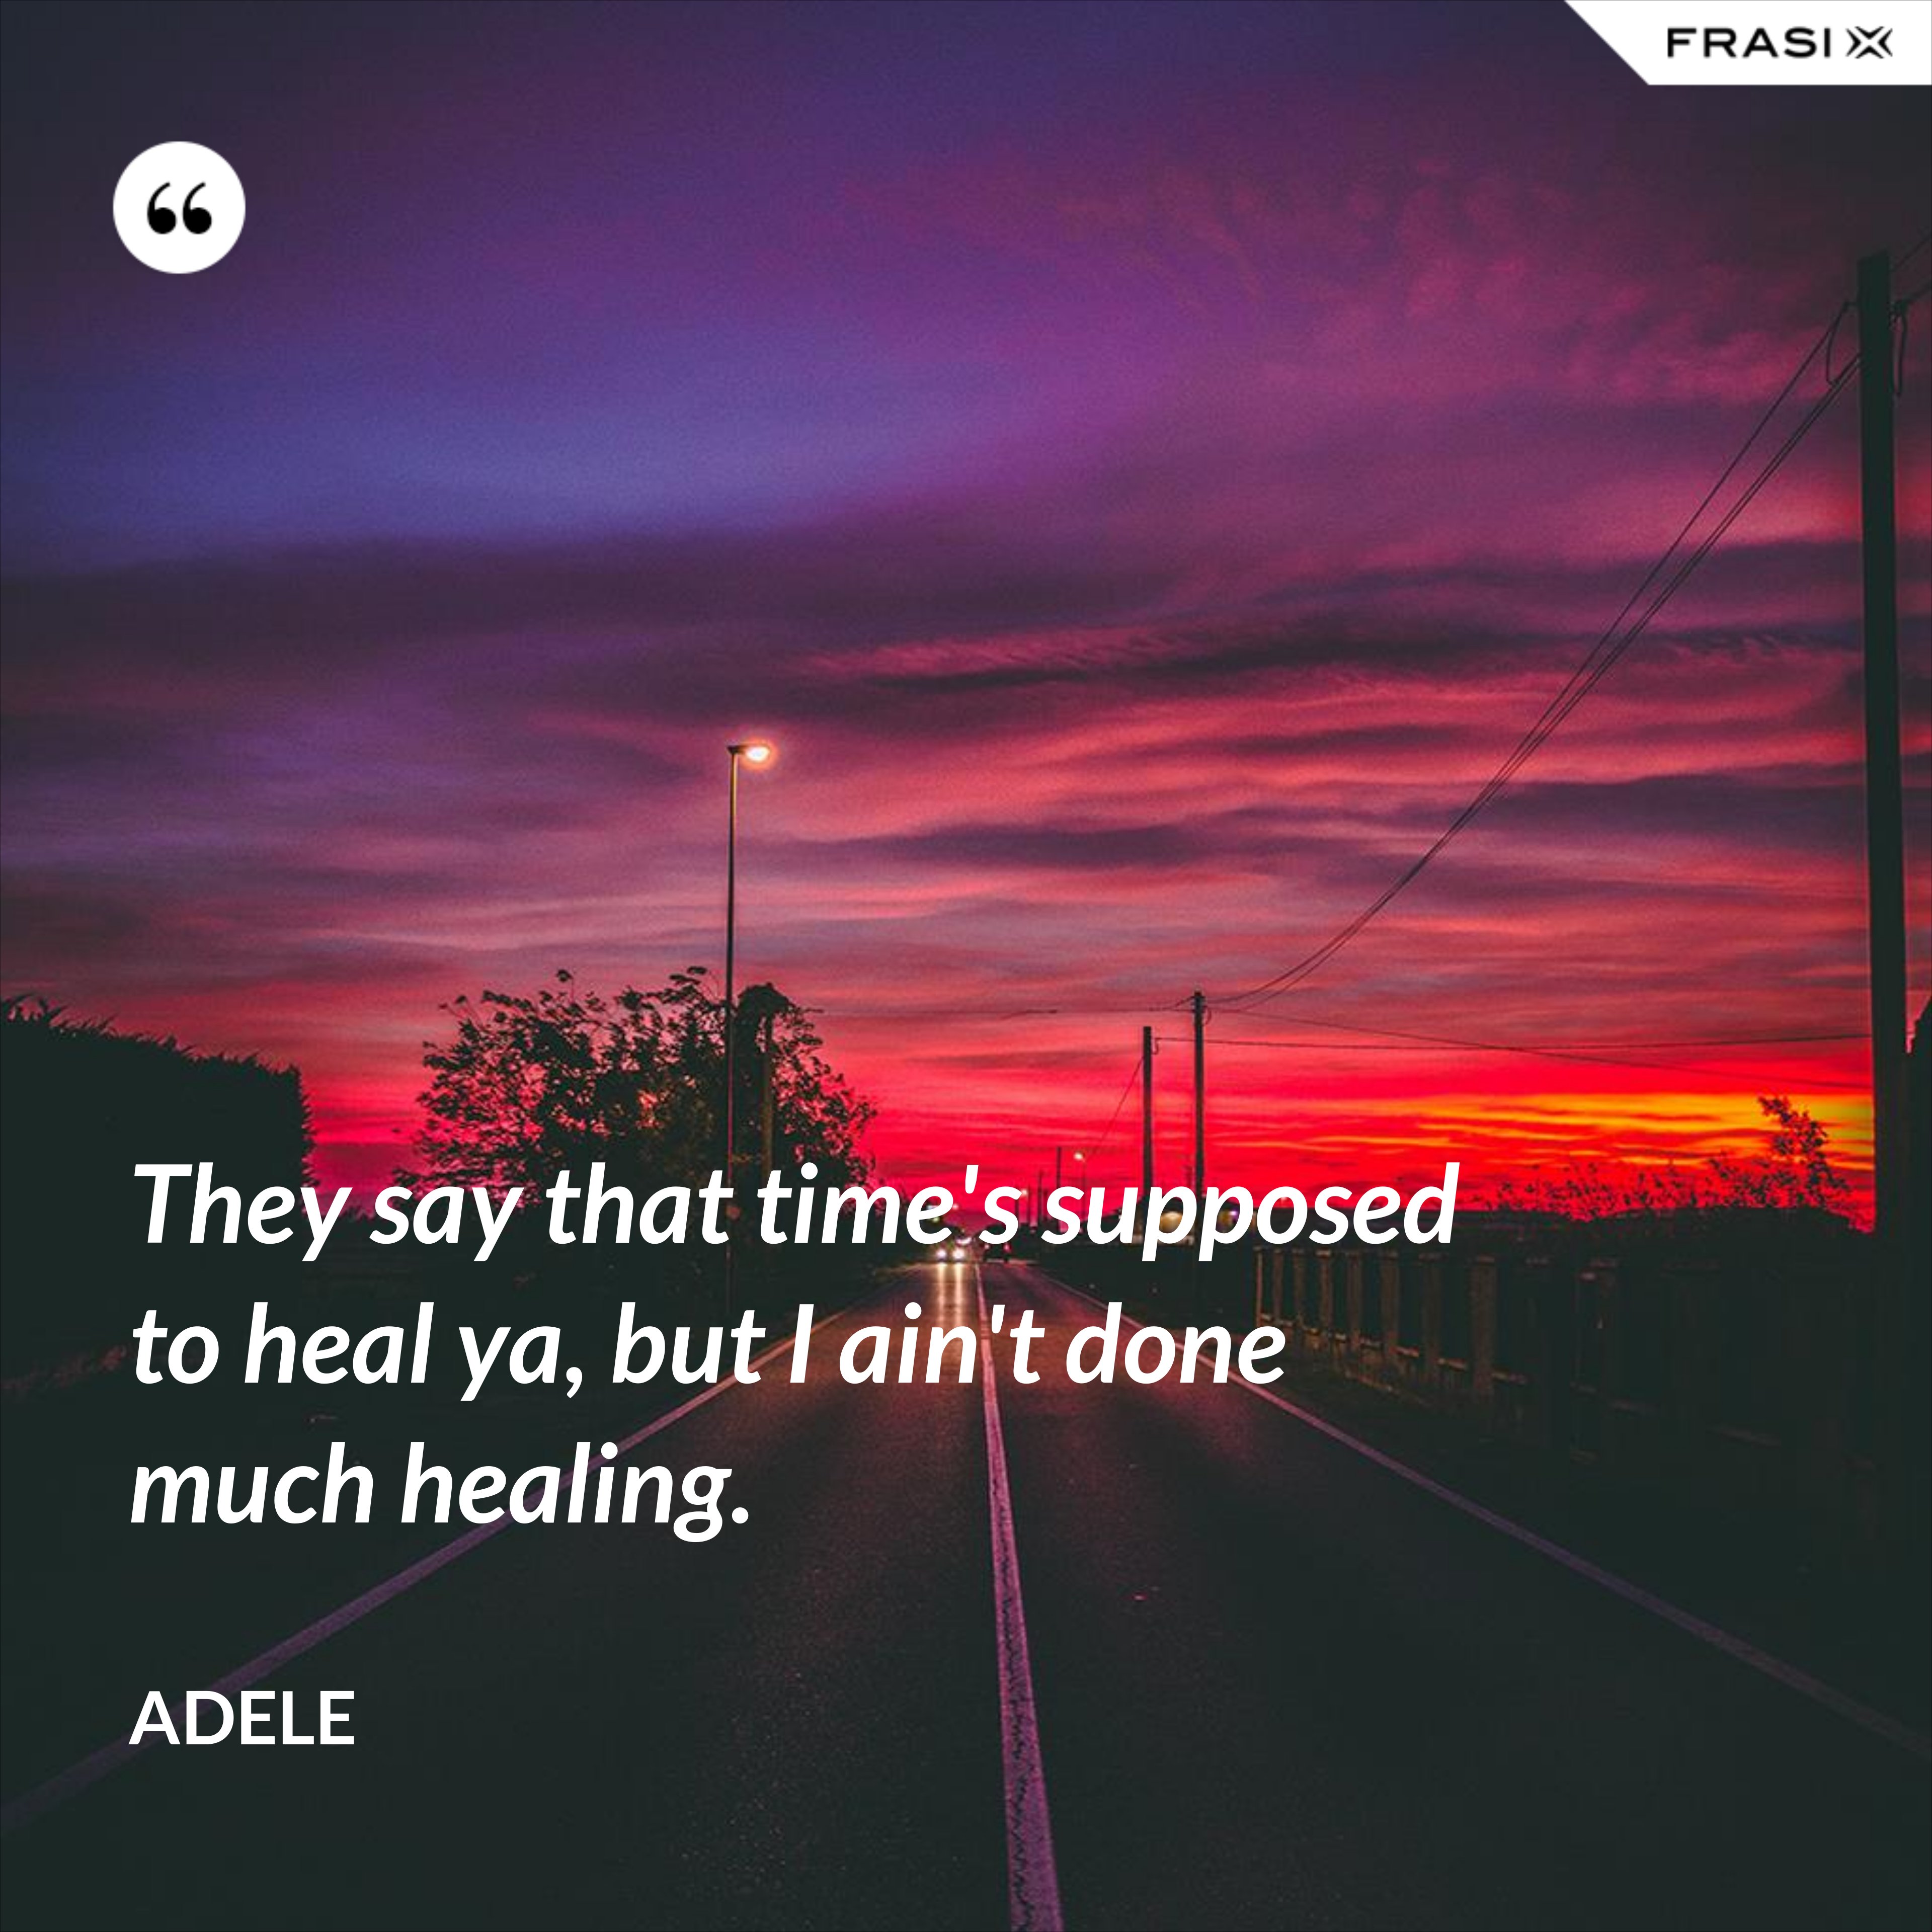 They say that time's supposed to heal ya, but I ain't done much healing. - Adele